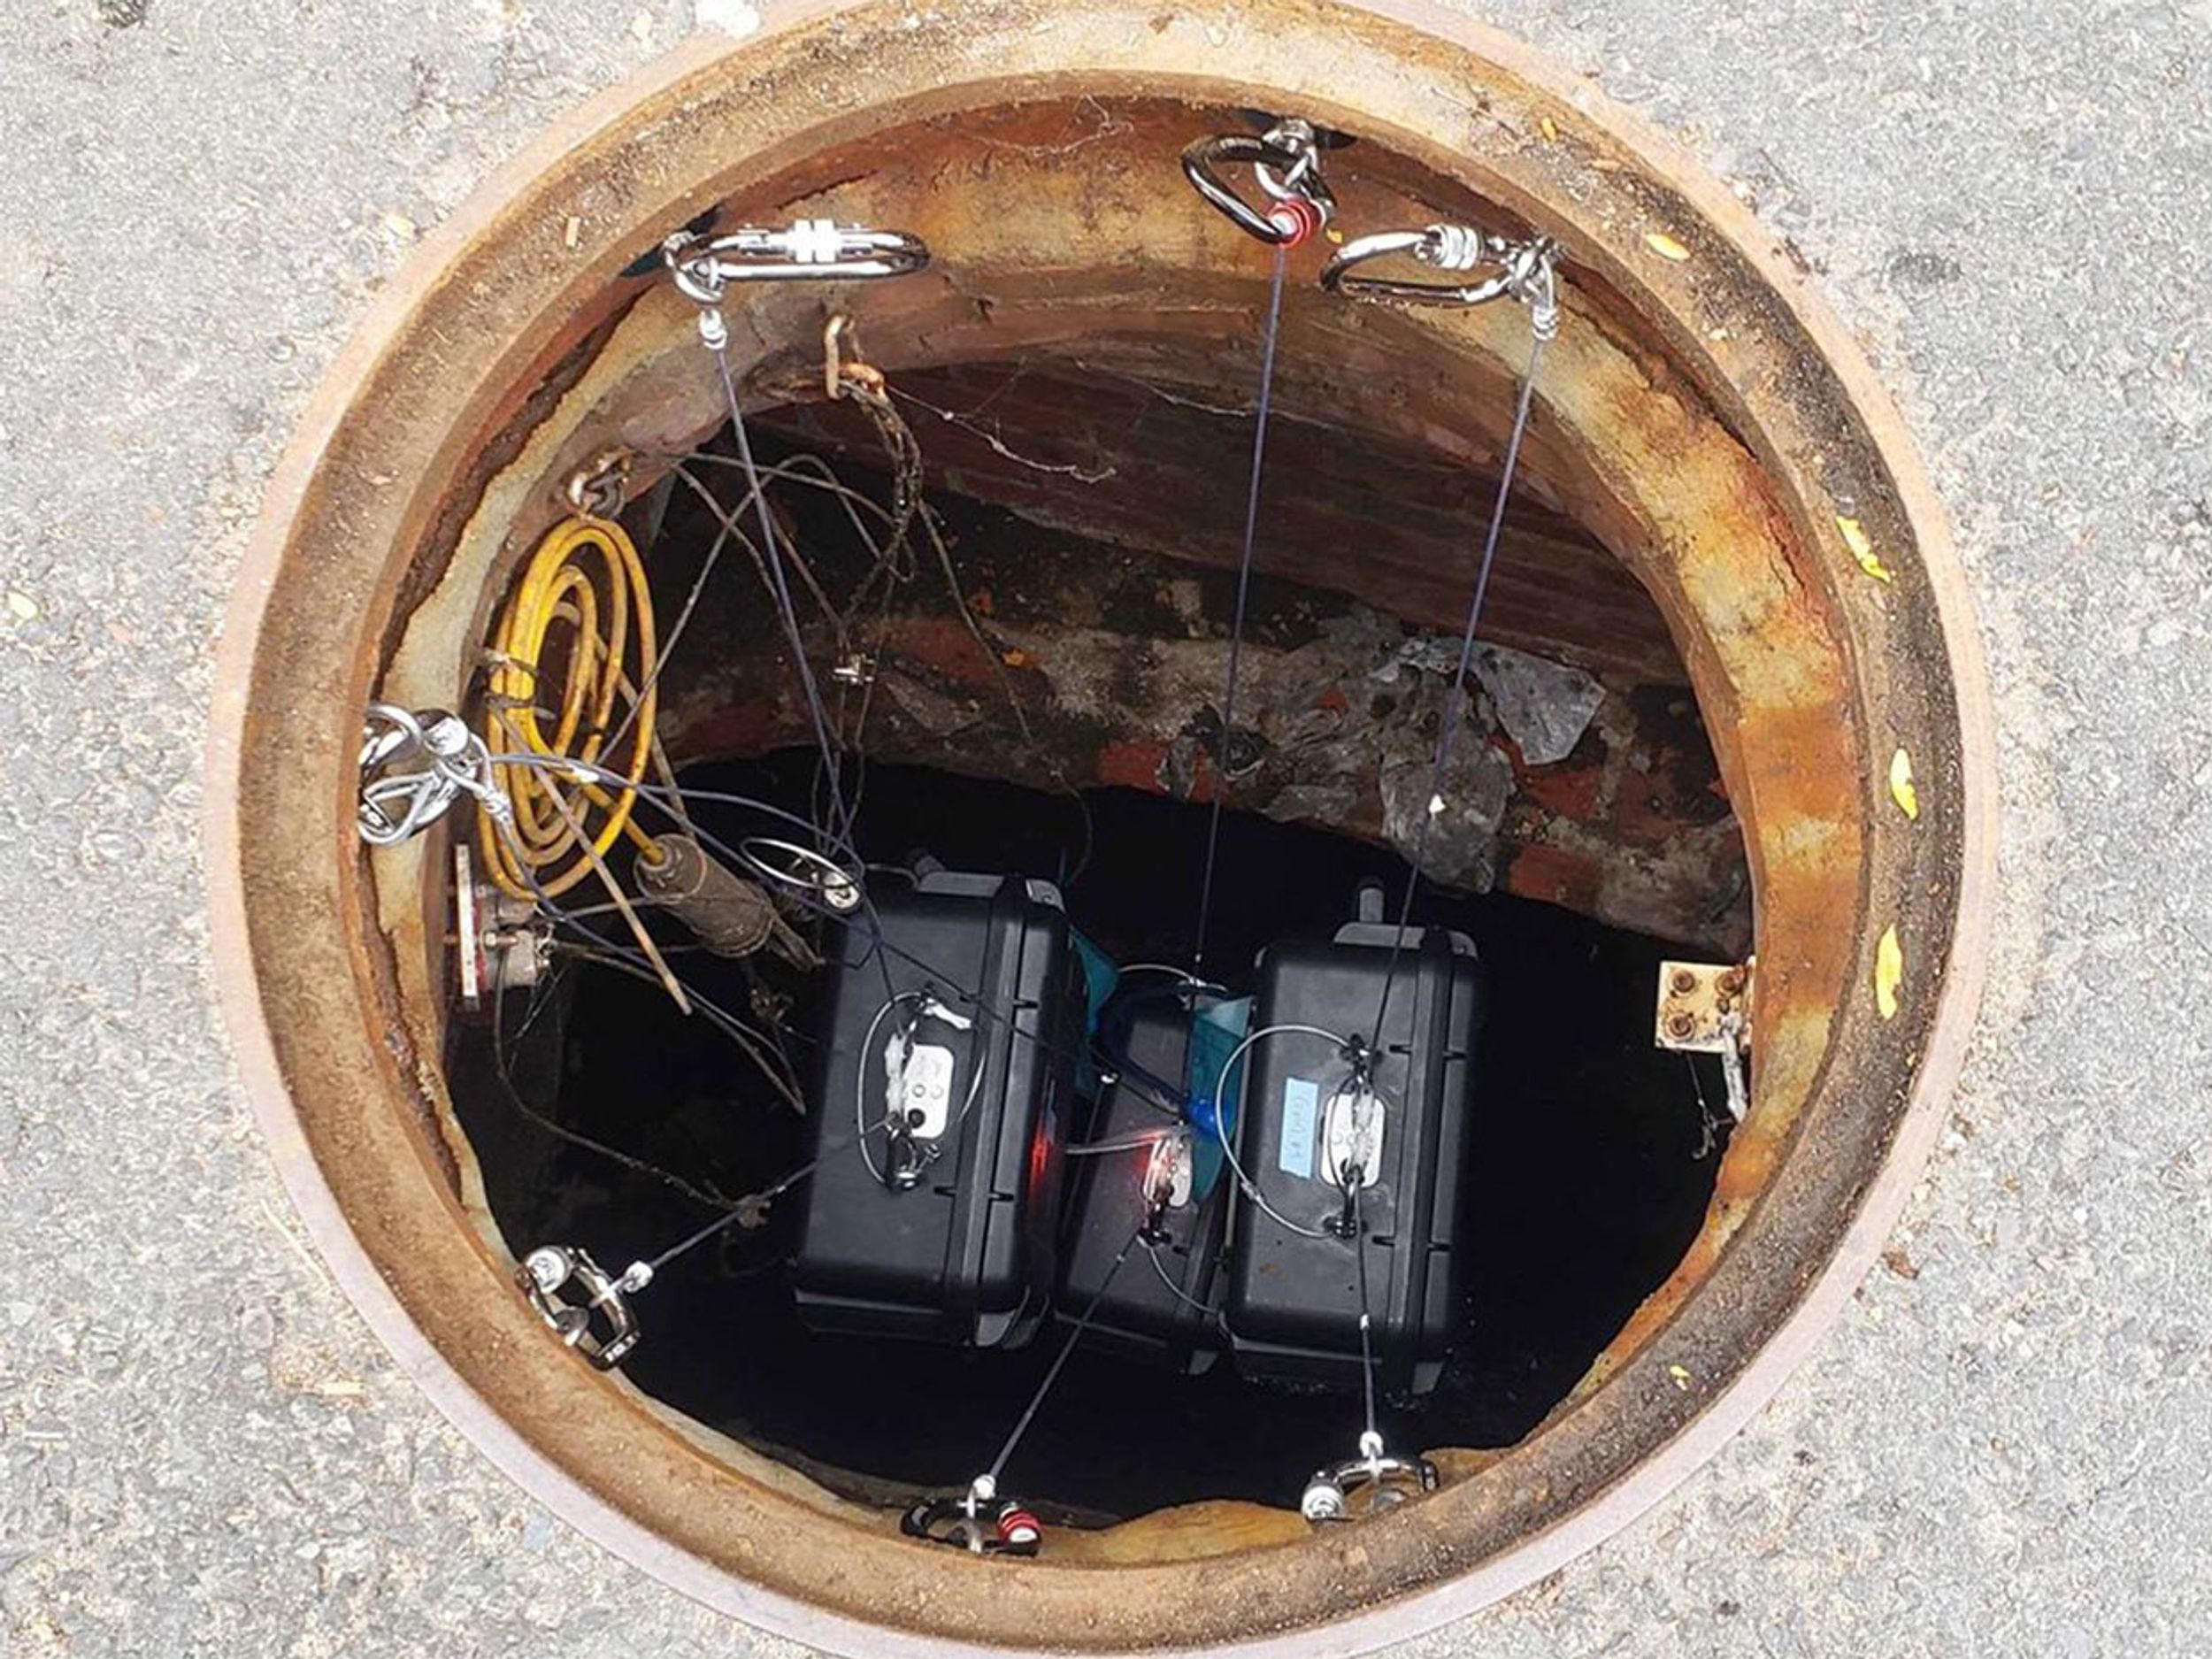 2019 photo of 3 Biobot Analytics robots in a sewer